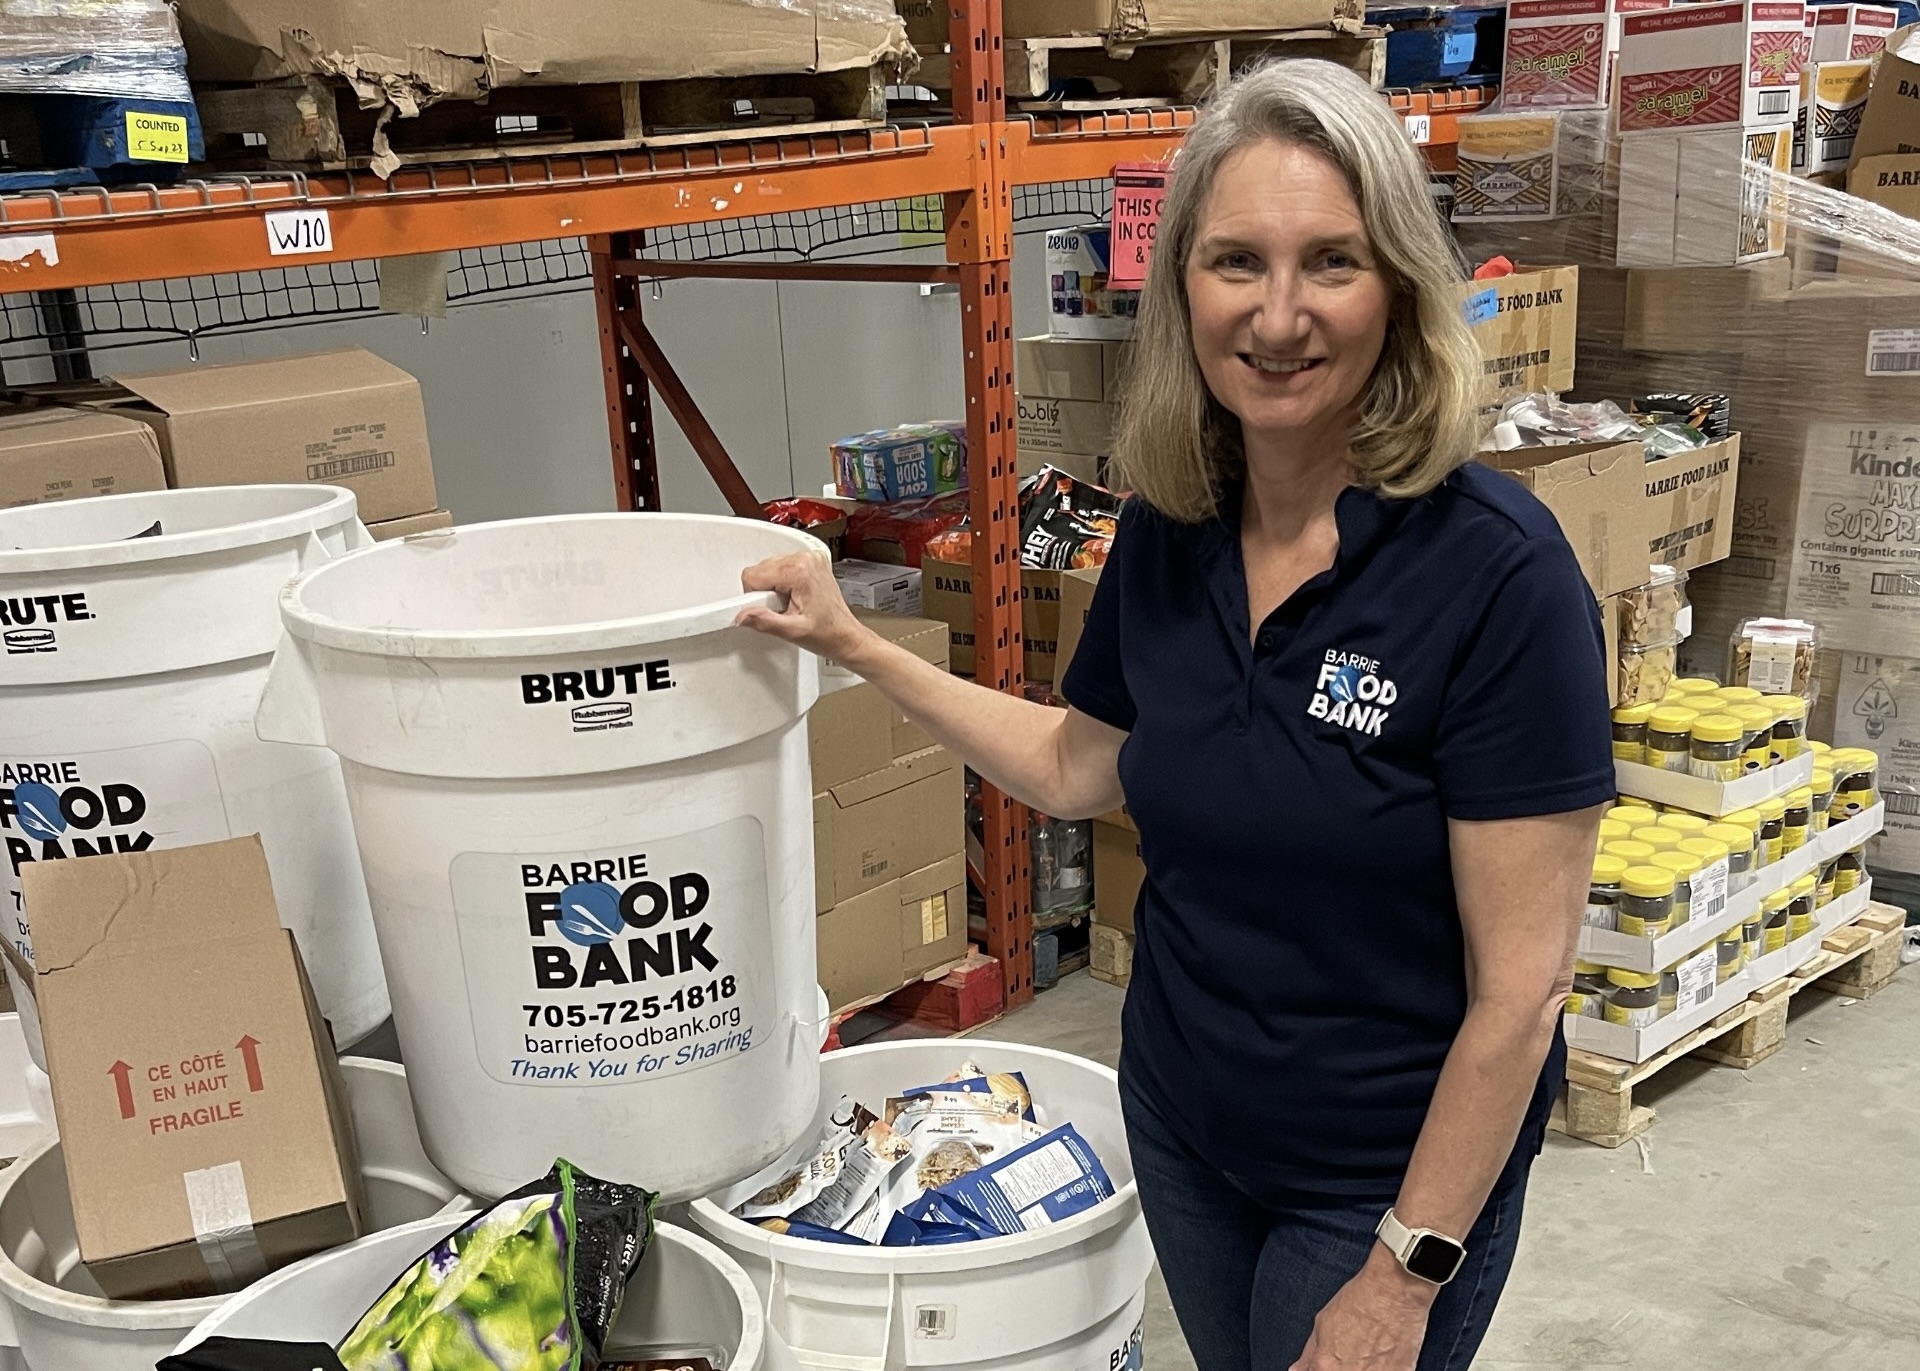 Retiring head of Barrie food bank reflects on challenges of pandemic, jump in demand